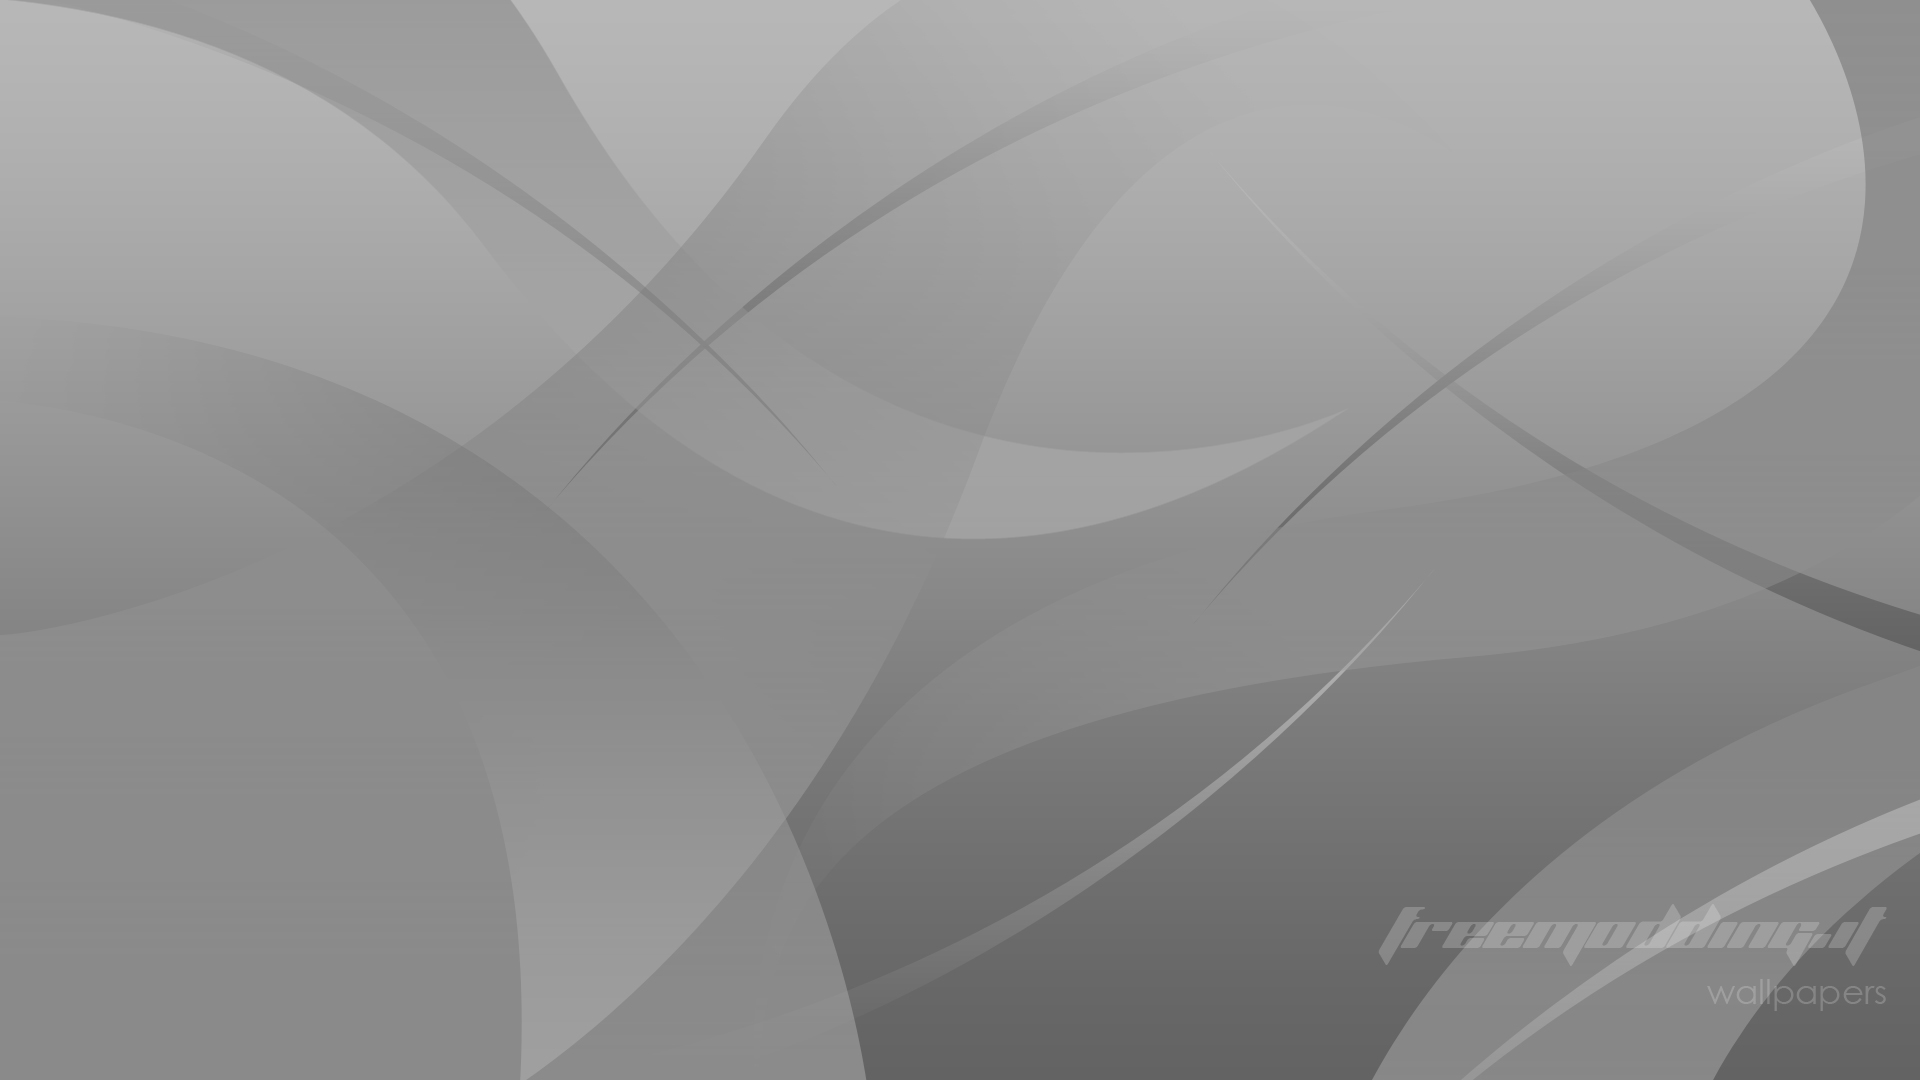 Tentacles HD Wallpaper Abstract Gray Version By Modding